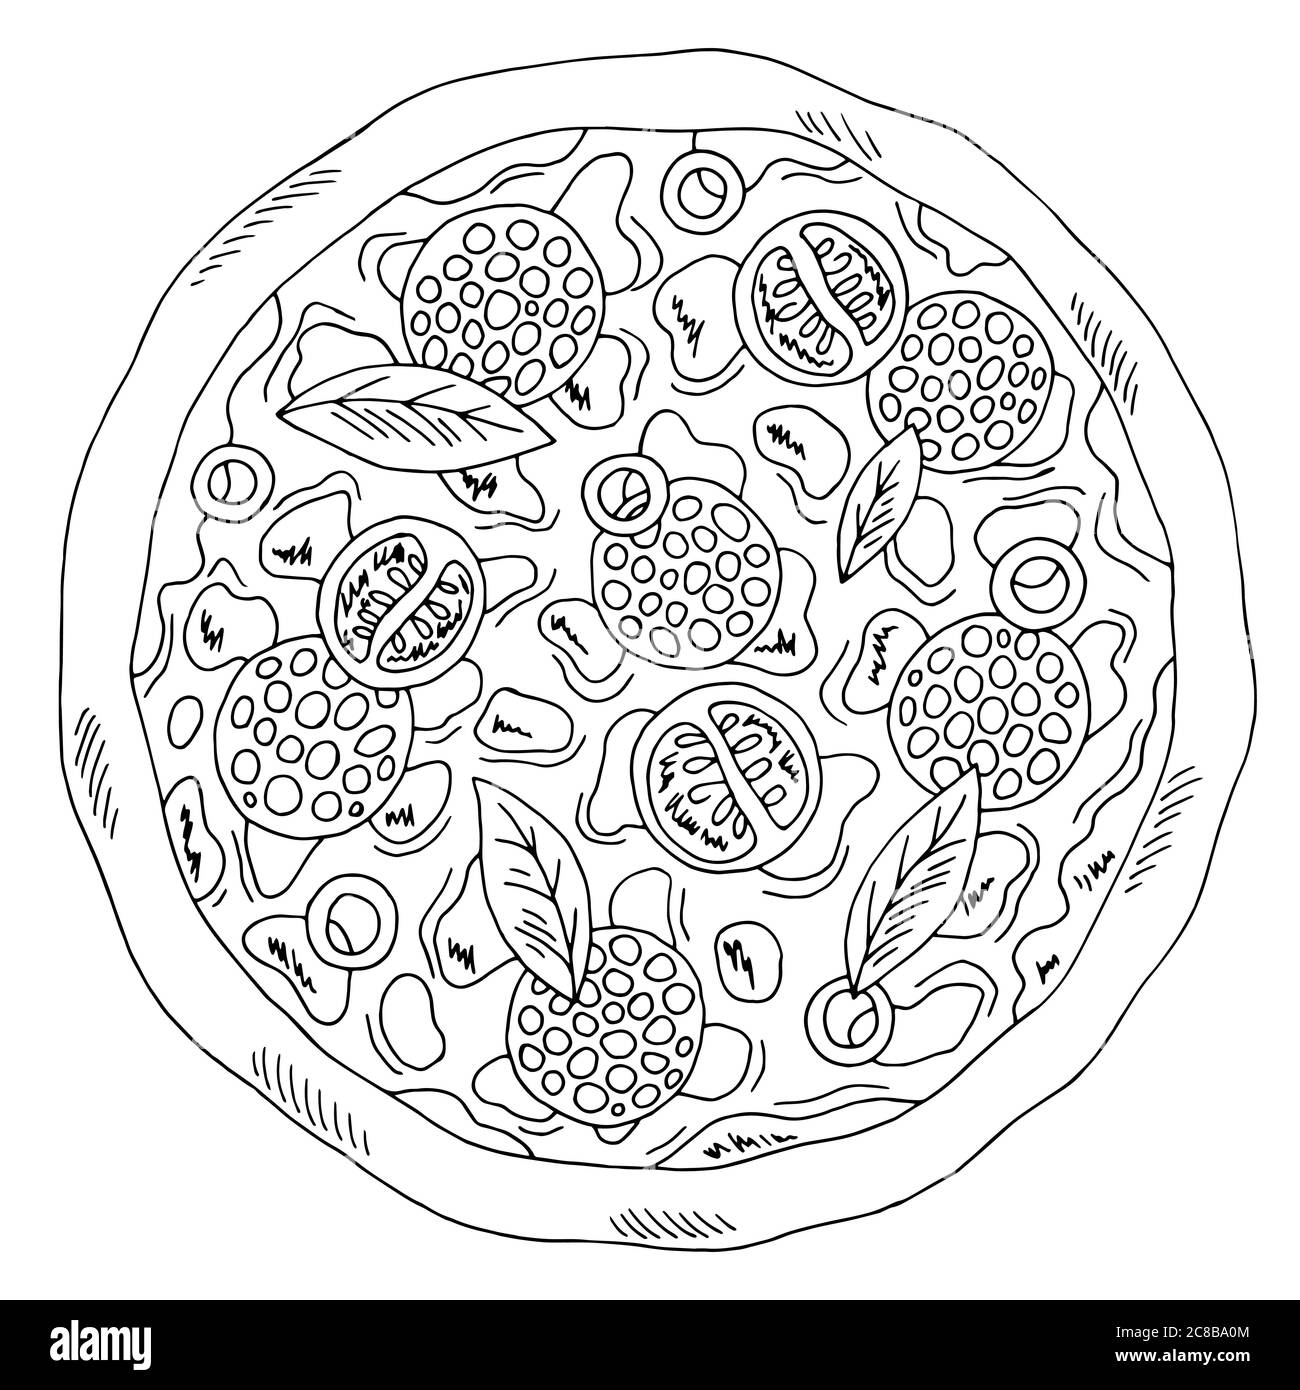 Pizza graphic fast food black white sketch isolated illustration vector Stock Vector